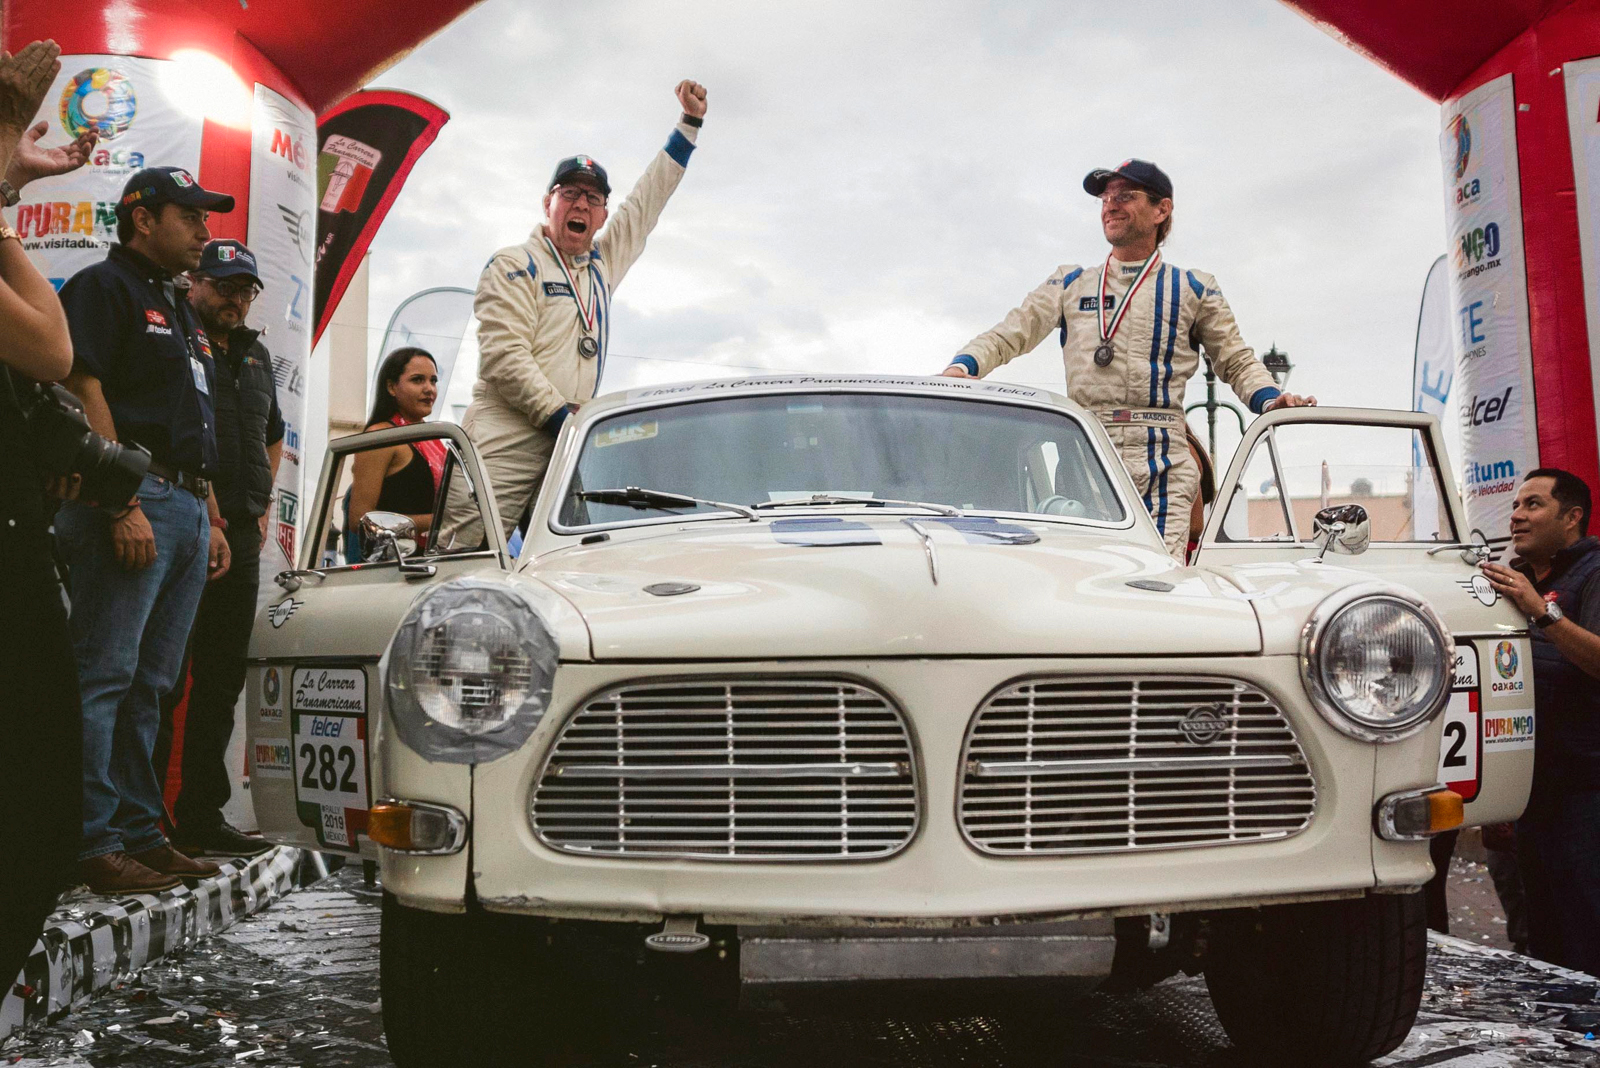 Racing a vintage Volvo in Mexico, two brothers find the 